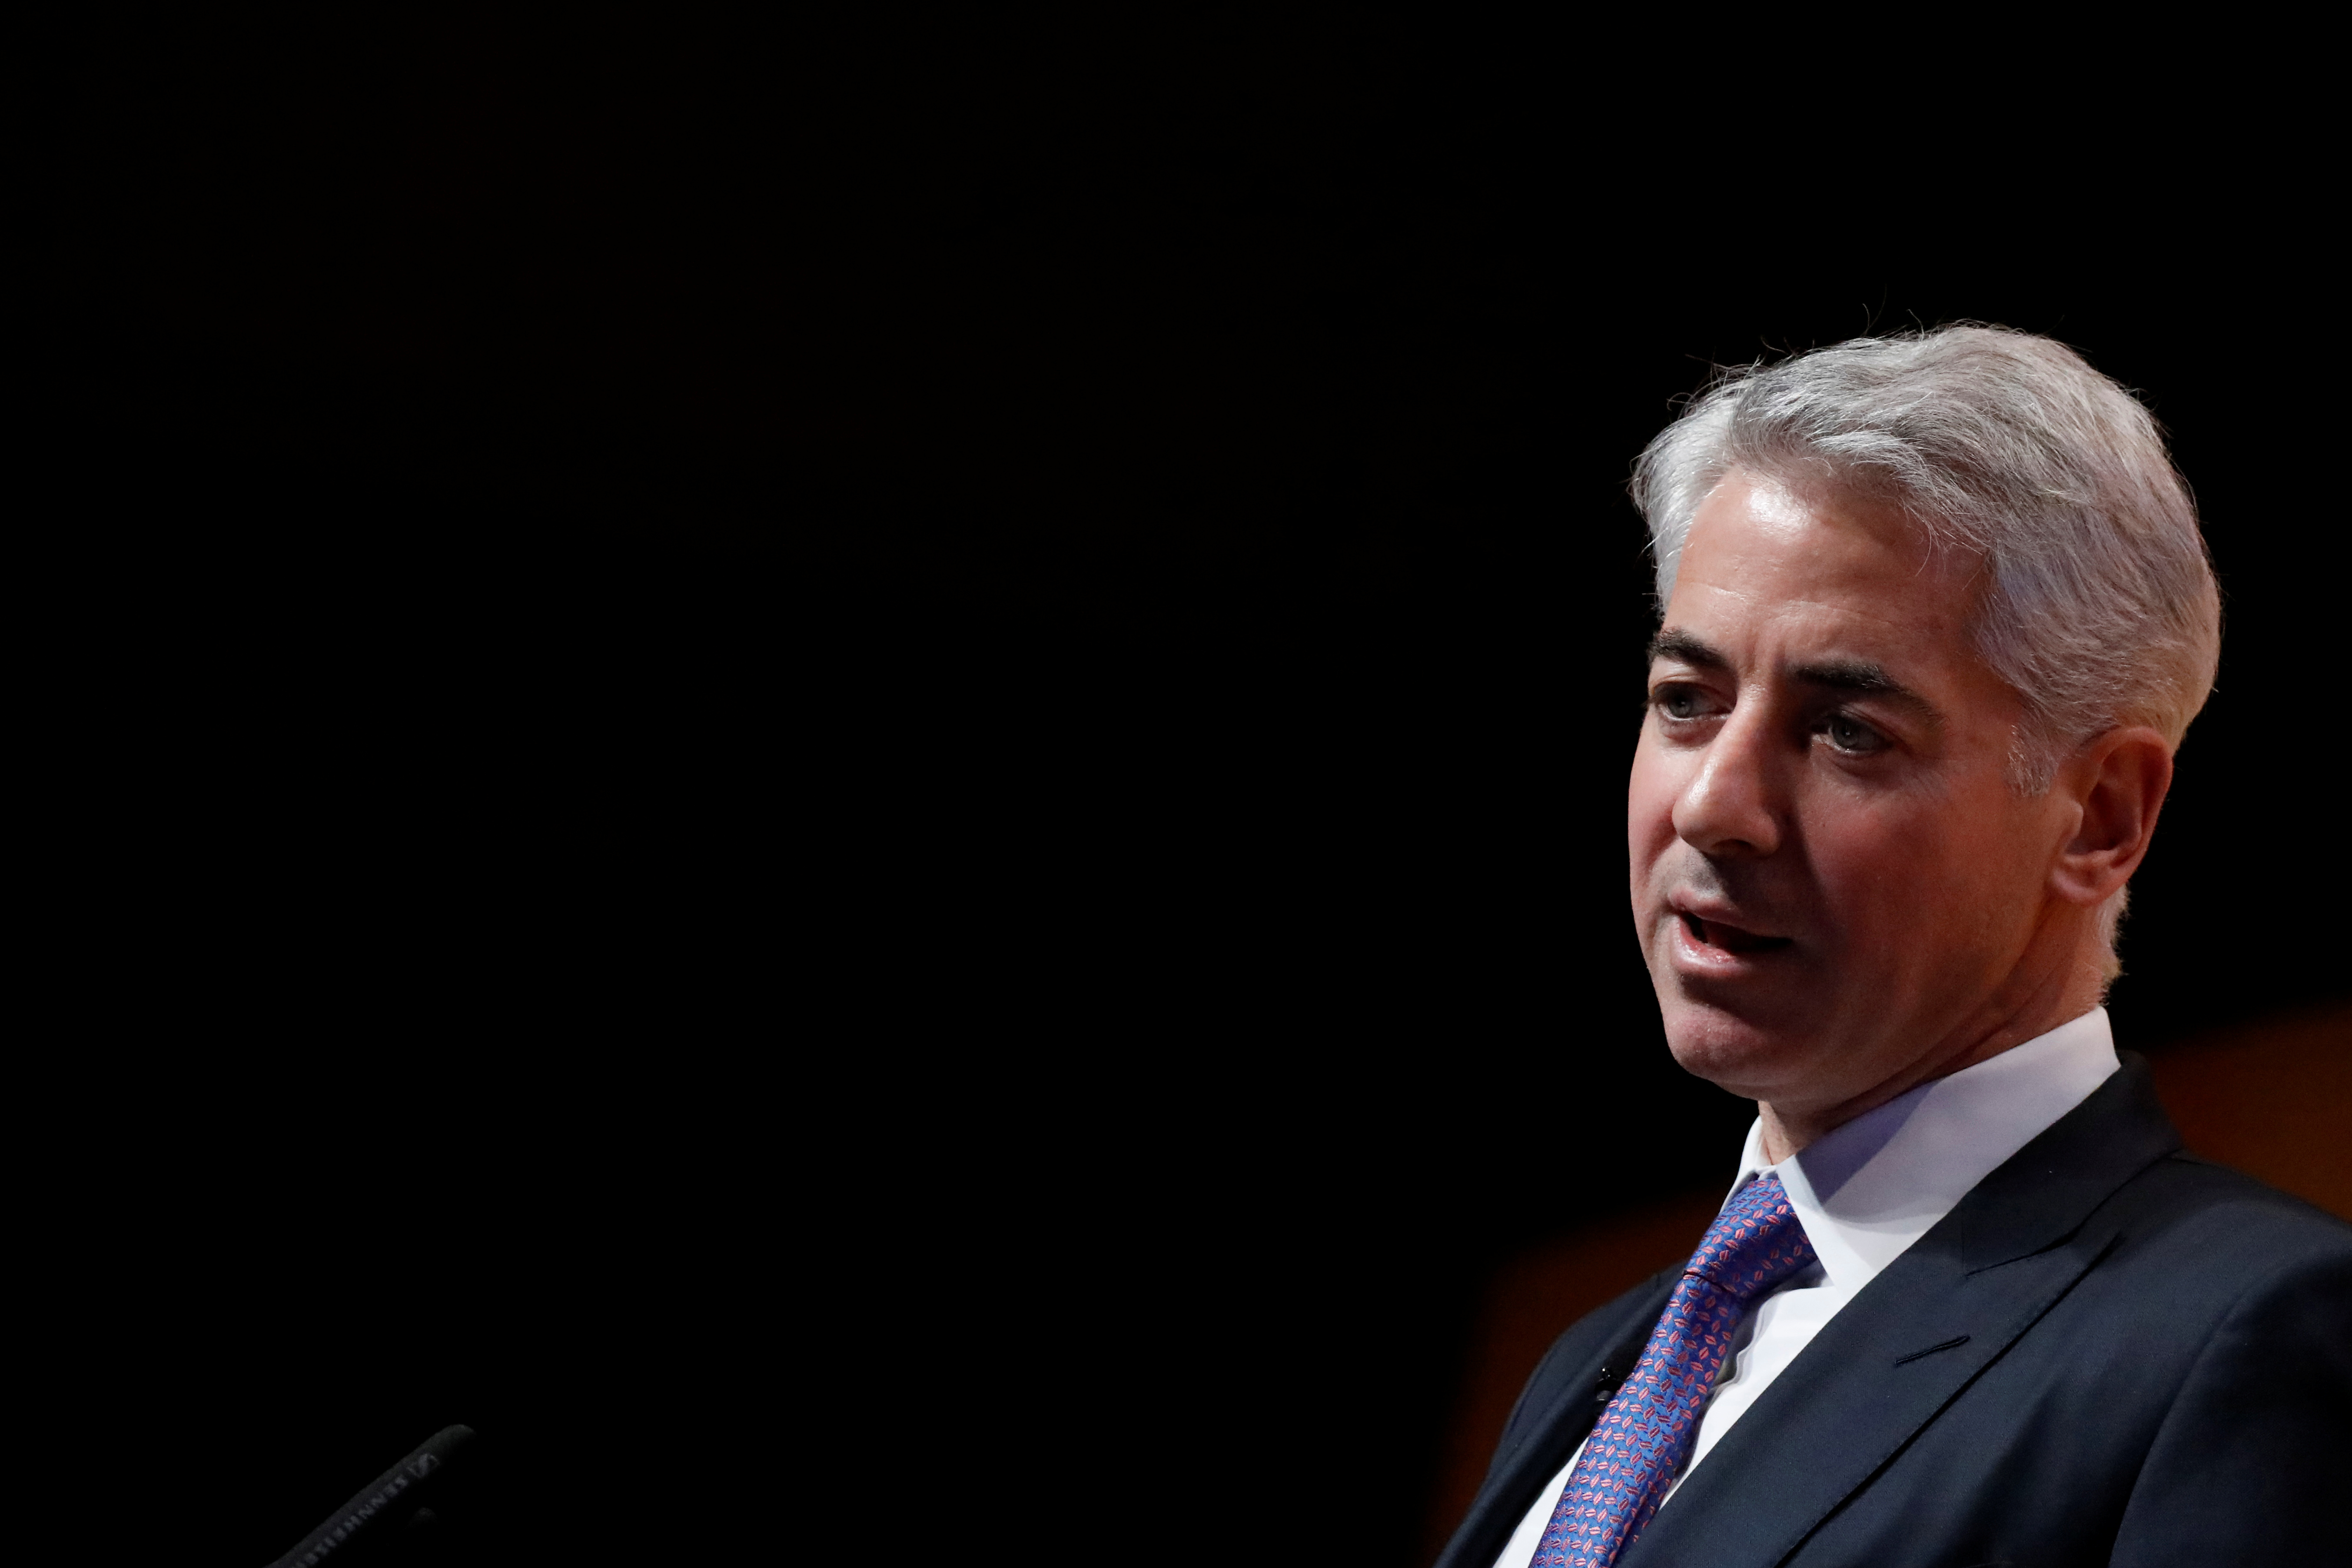 William 'Bill' Ackman, CEO and Portfolio Manager of Pershing Square Capital Management, speaks during the Sohn Investment Conference in New York City